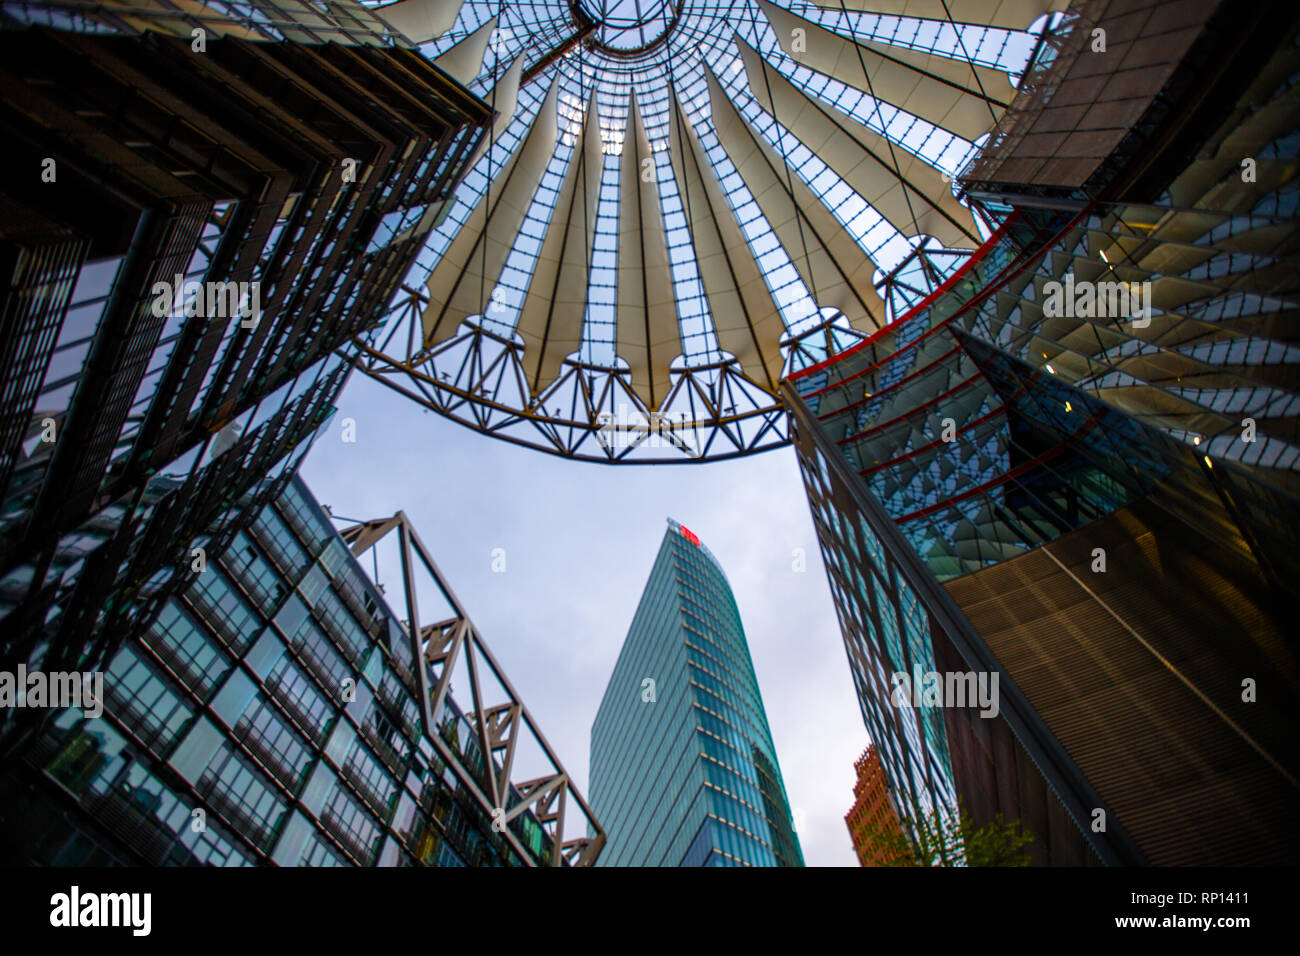 The eye popping architecture of the Sony Centre/Centre in Potsdamer Platz, Berlin, Germany. Stock Photo